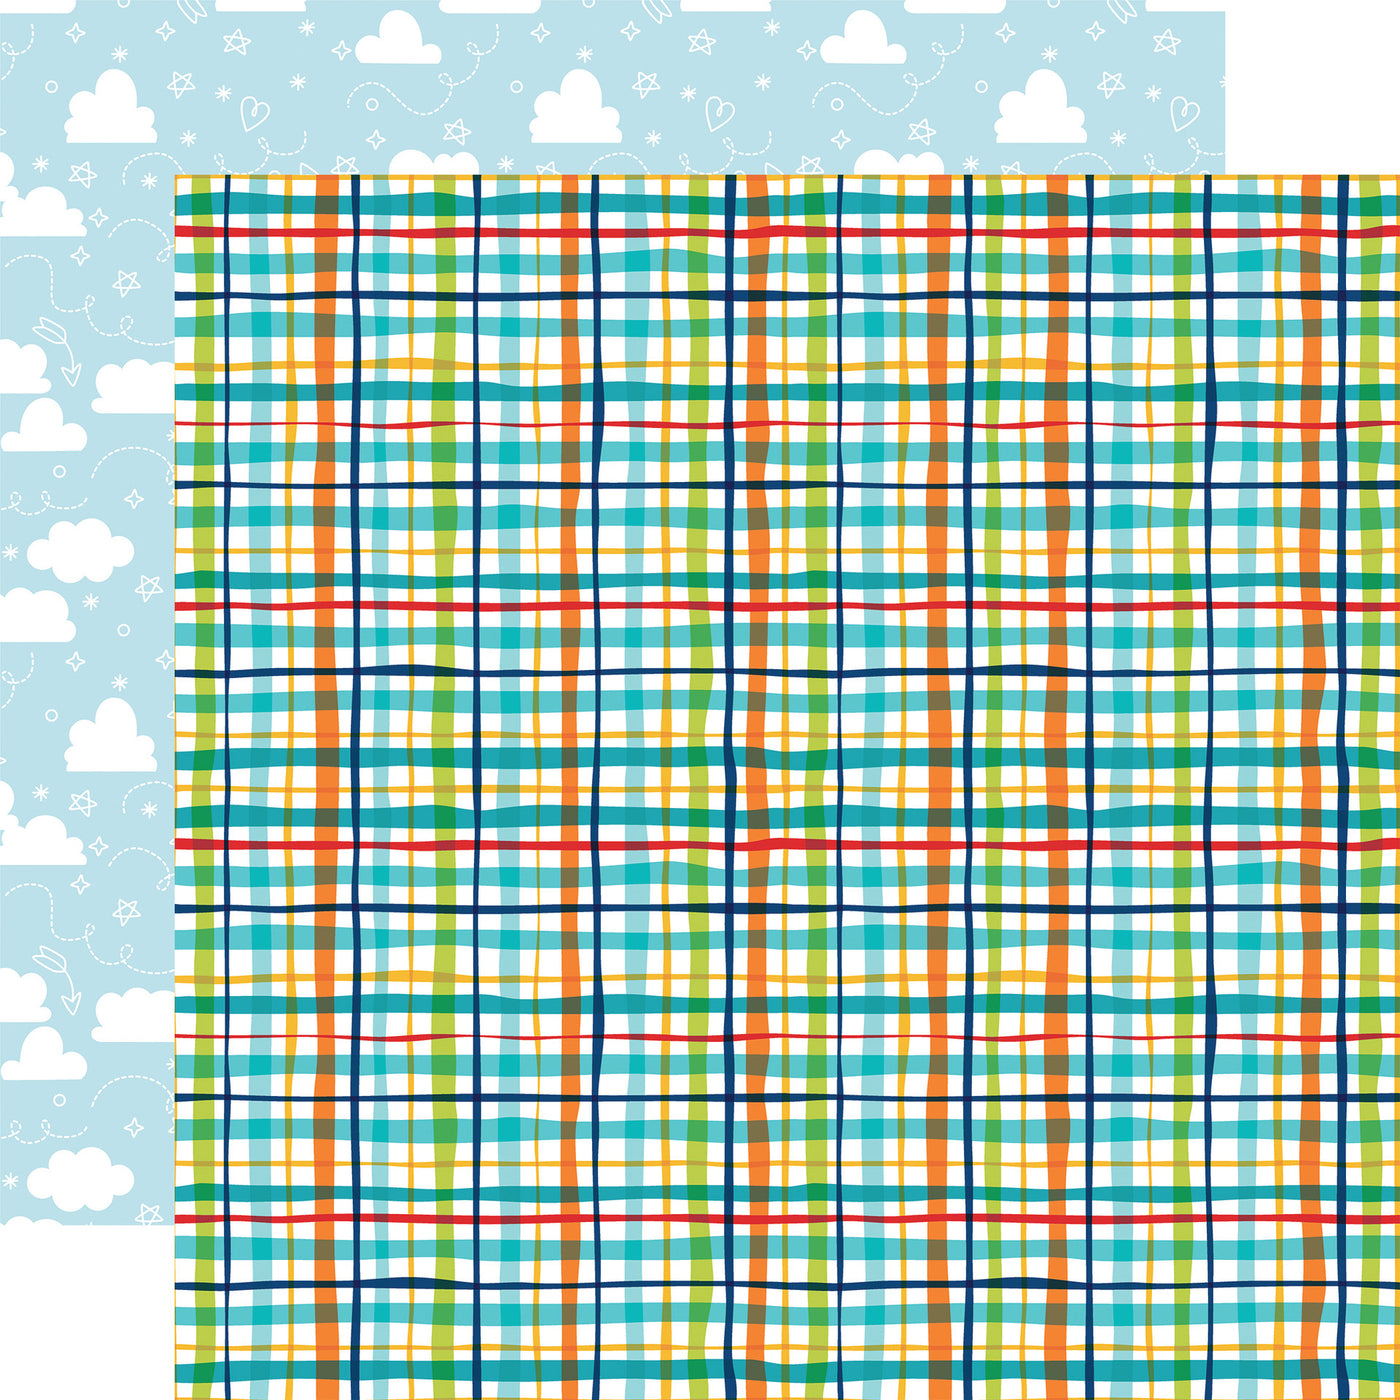 12x12 double-sided patterned paper. (Side A - plaid in blue, green, orange, and yellow on a white background. Side B - white clouds with hearts and stars on a light blue background); archival quality and acid-free.